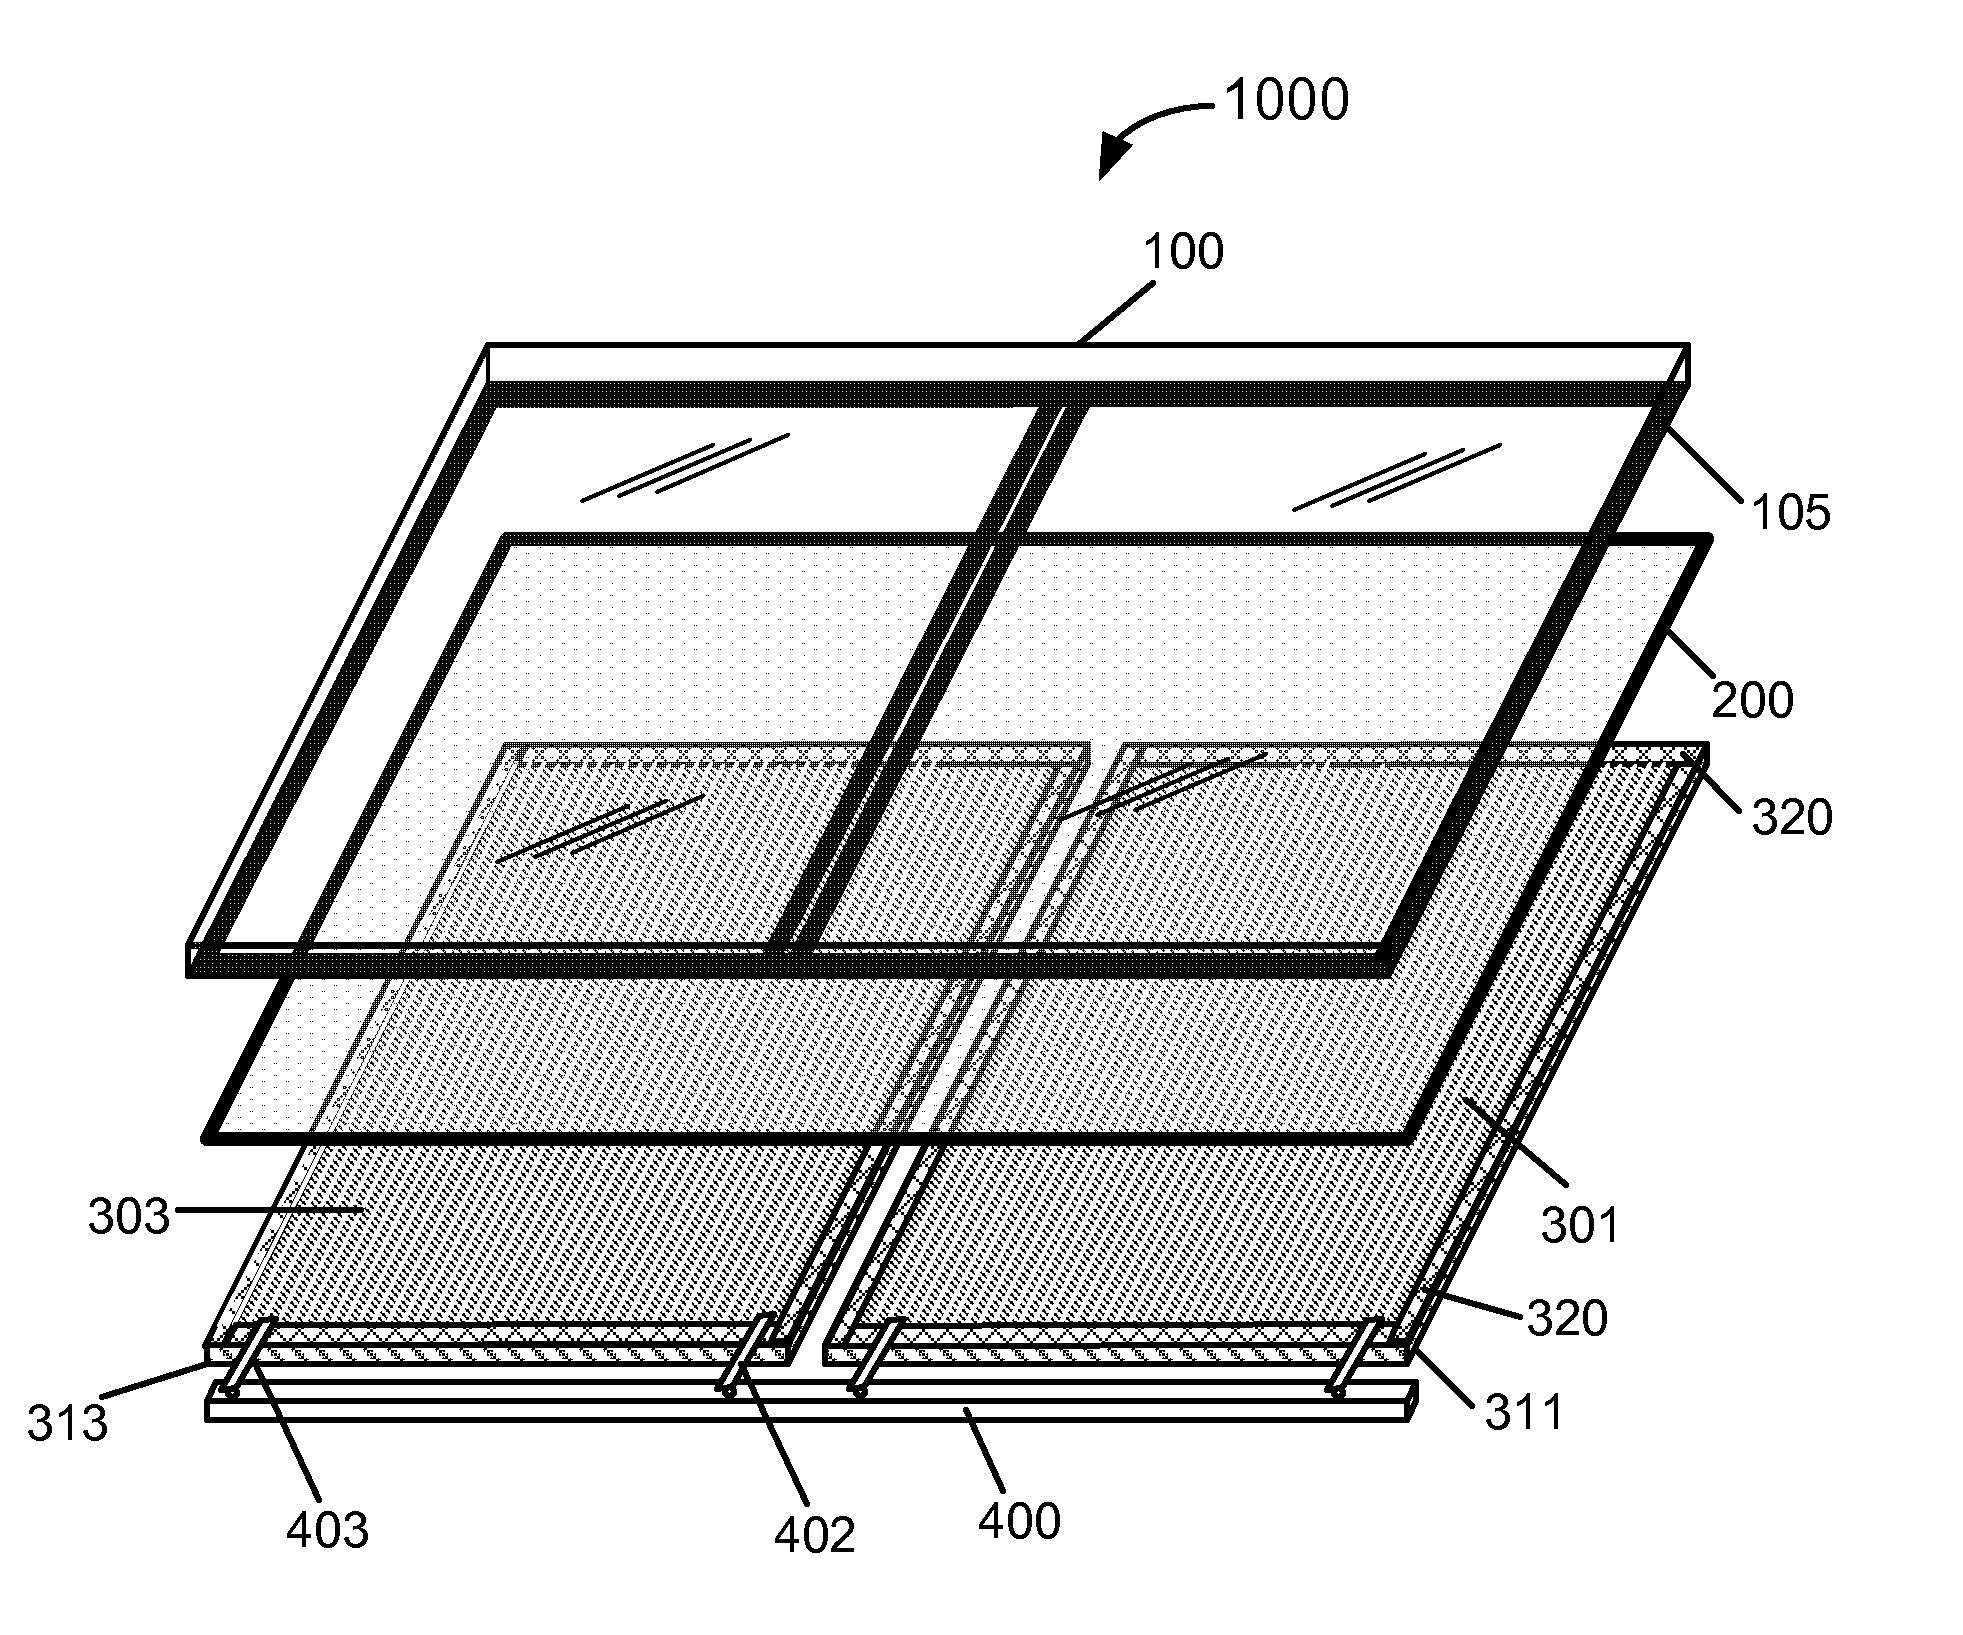 Method and Structure for Tiling Industrial Thin-Film Solar Devices